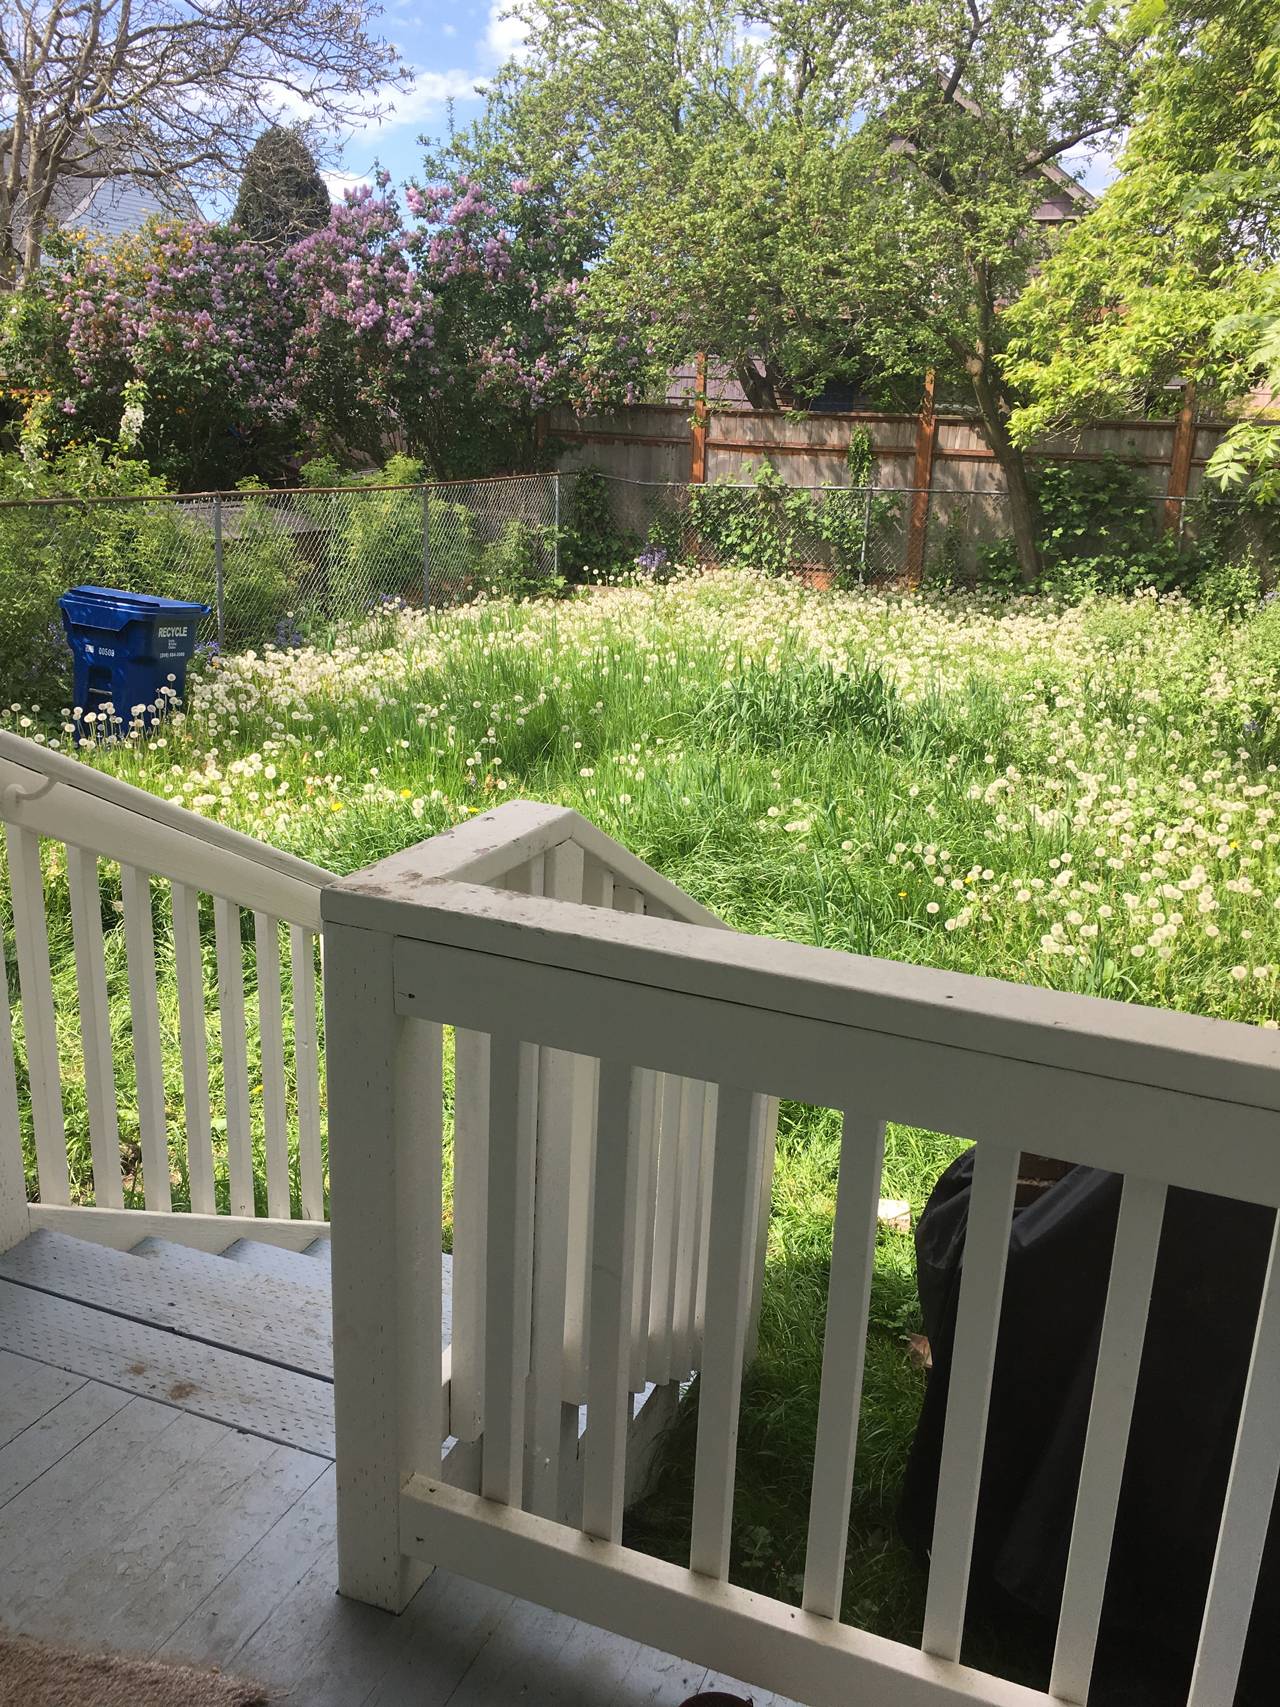 view of backyard lawnspace covered completely in weeds